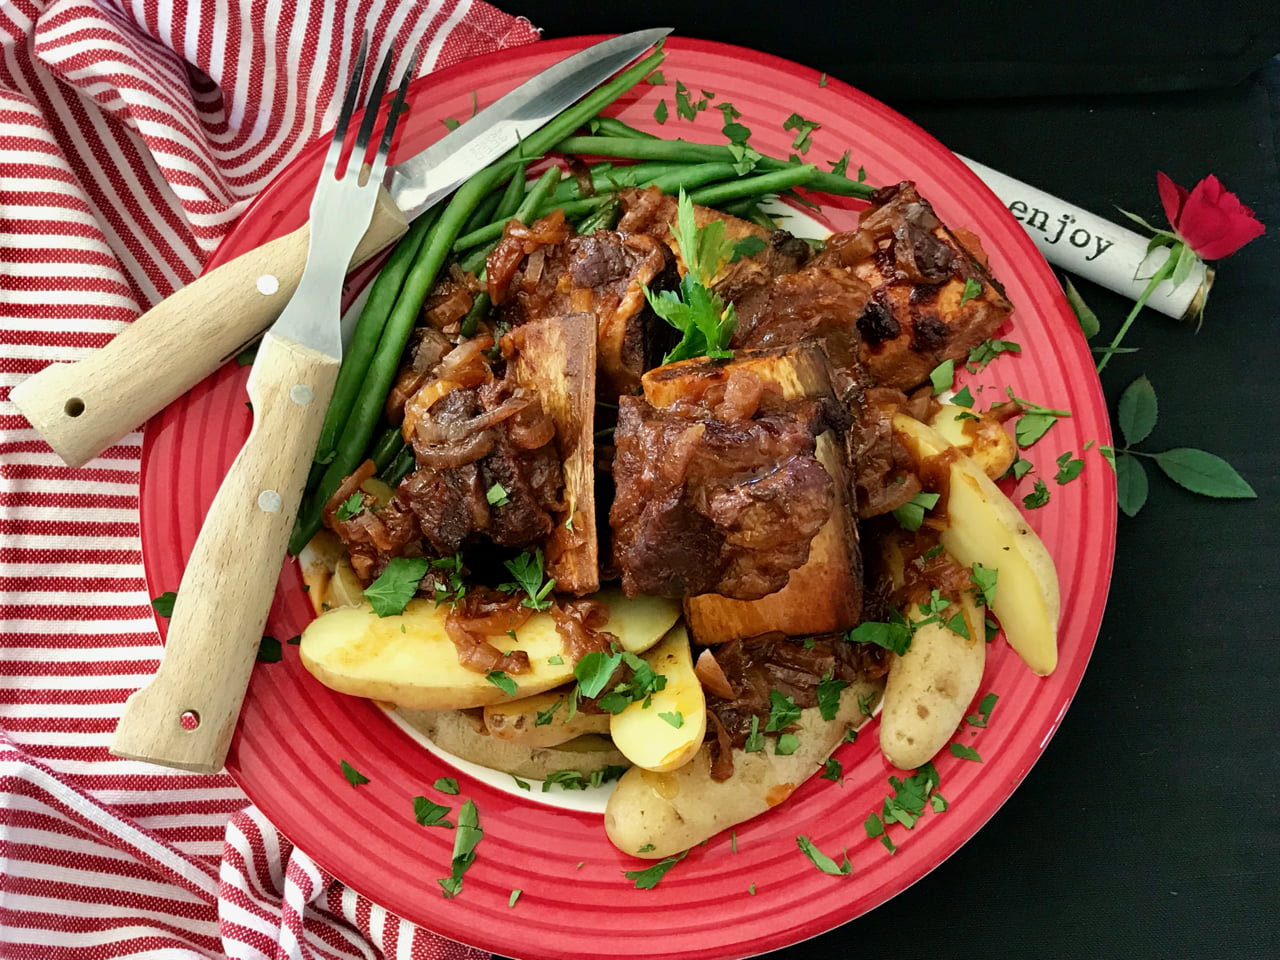 Wine and Pomegranate Slow Roasted Short Ribs